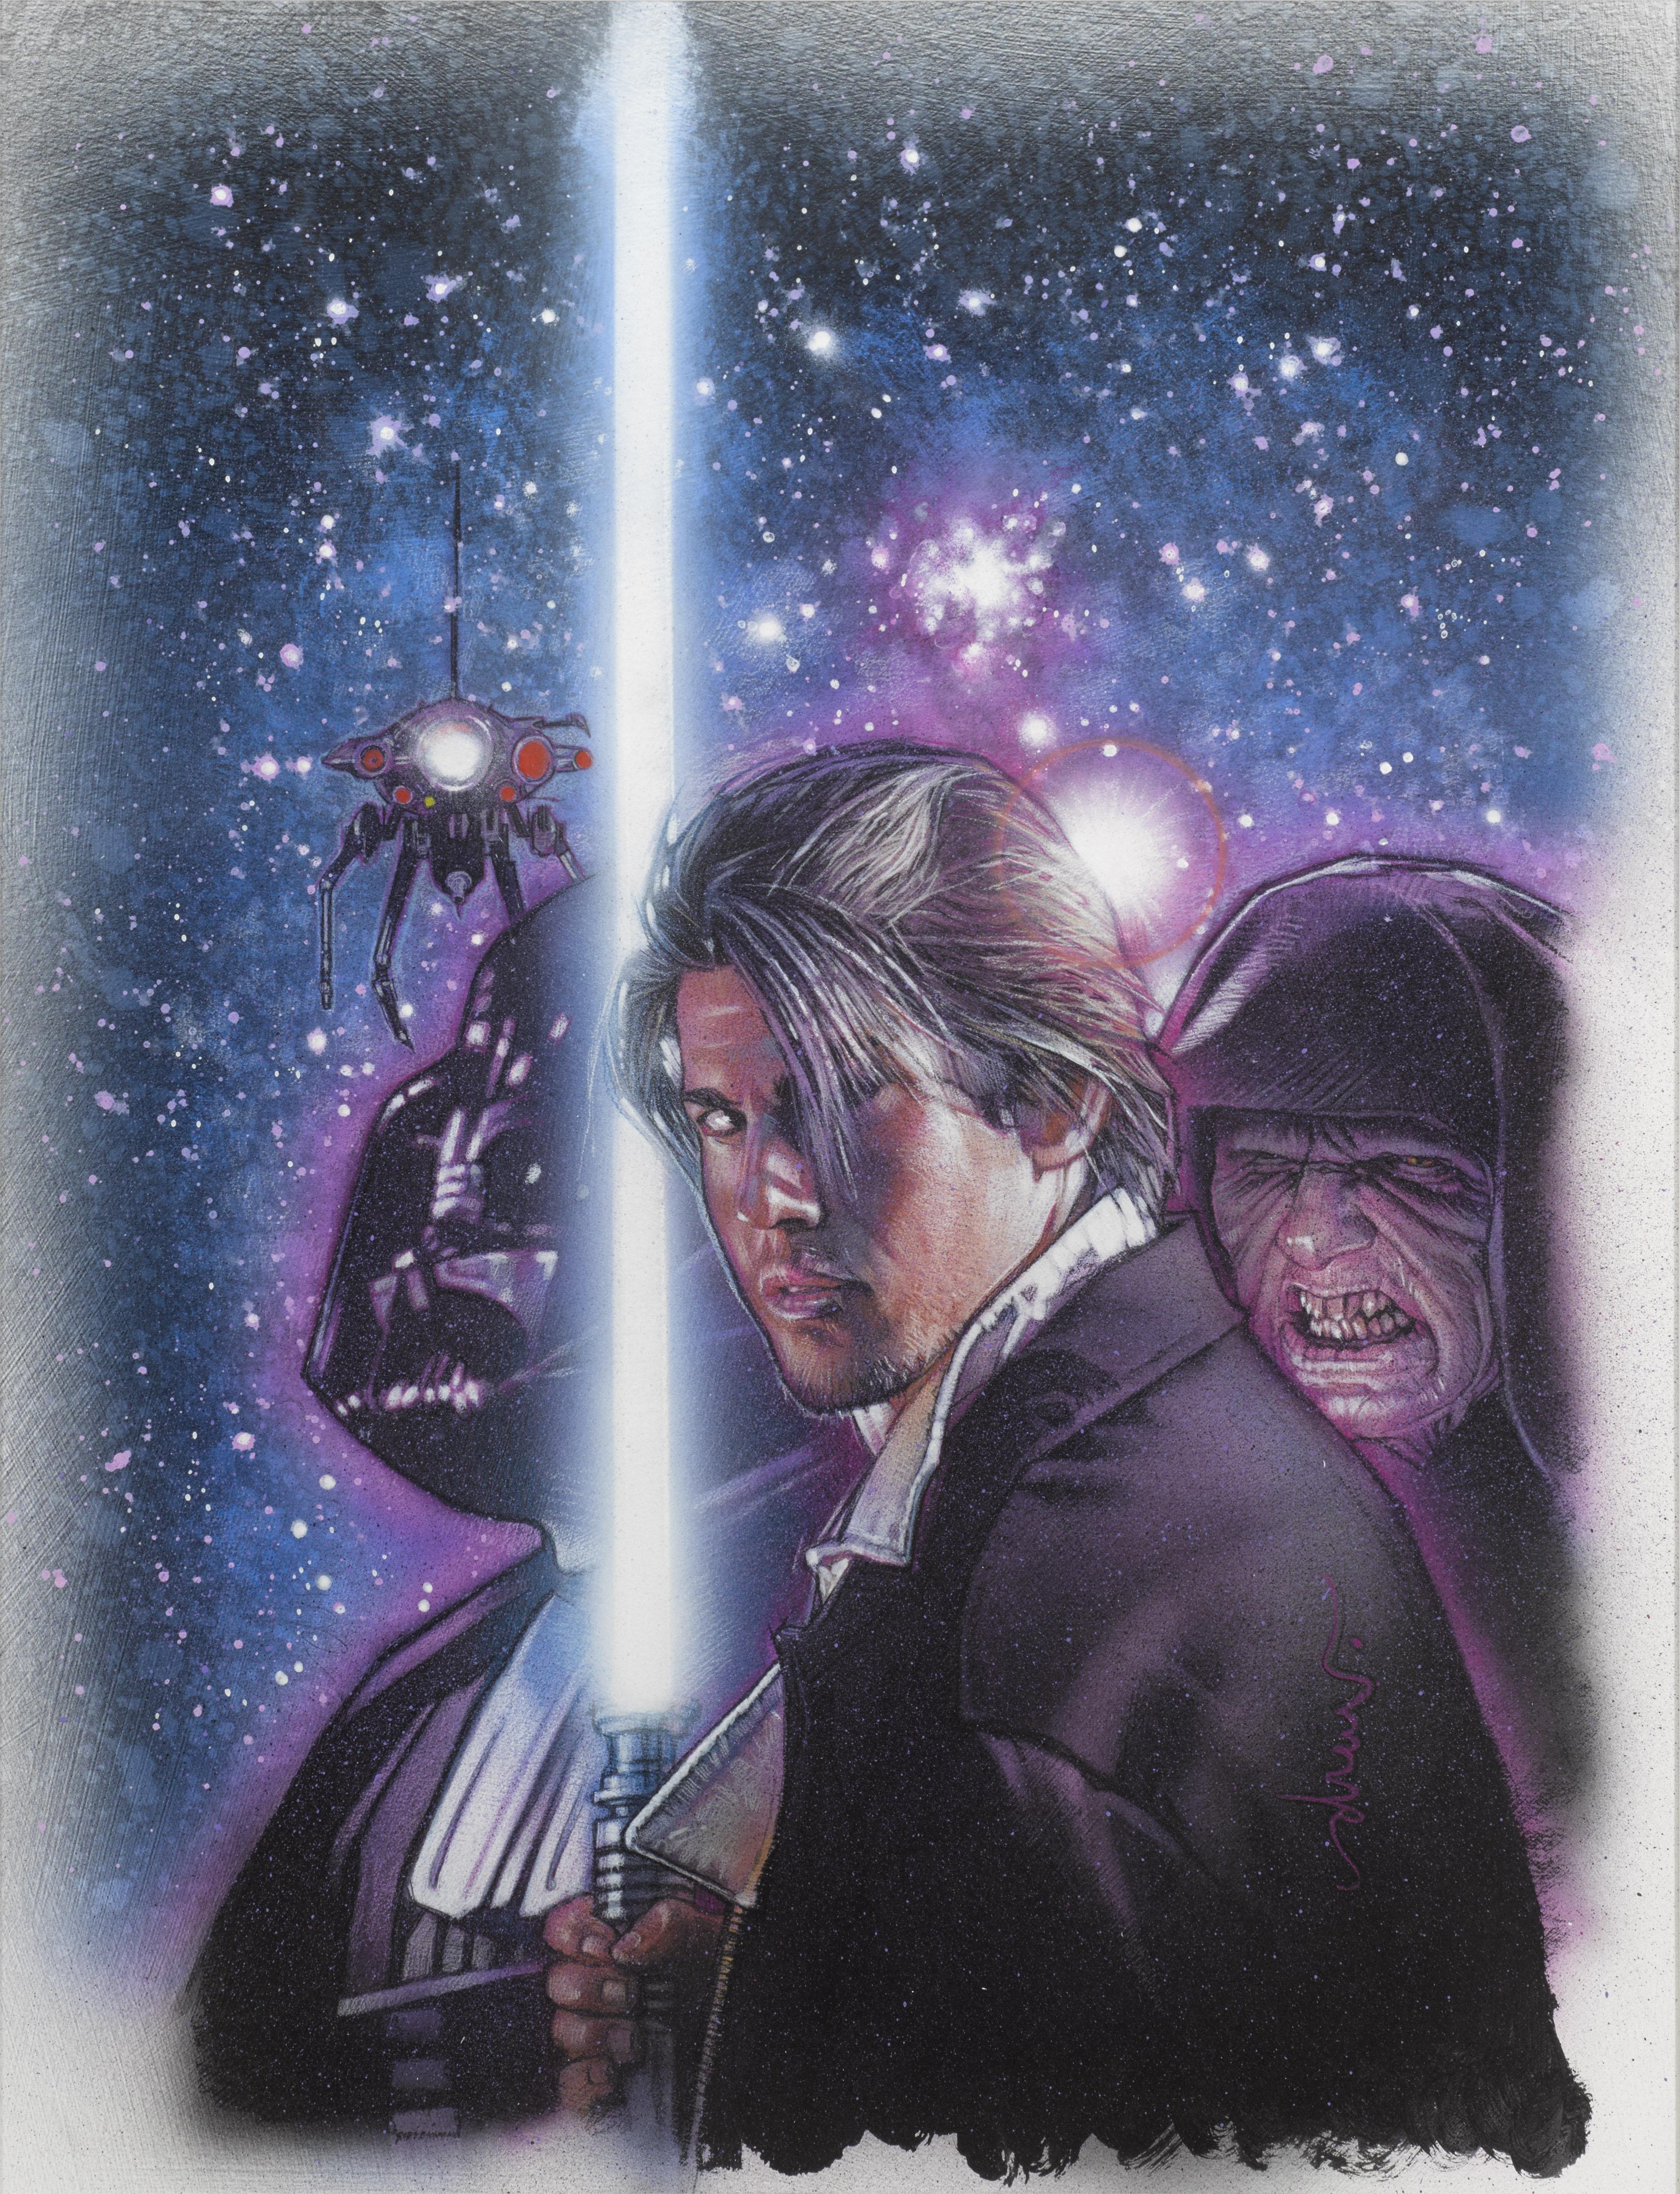 Original US Cover art Mixed media on illustration board.
This original artwork by the legendary American artist/illustrator Drew Struzan was created for the book cover of Star Wars: The Last of the Jedi book 6 Return of the Dark Side, as part of a